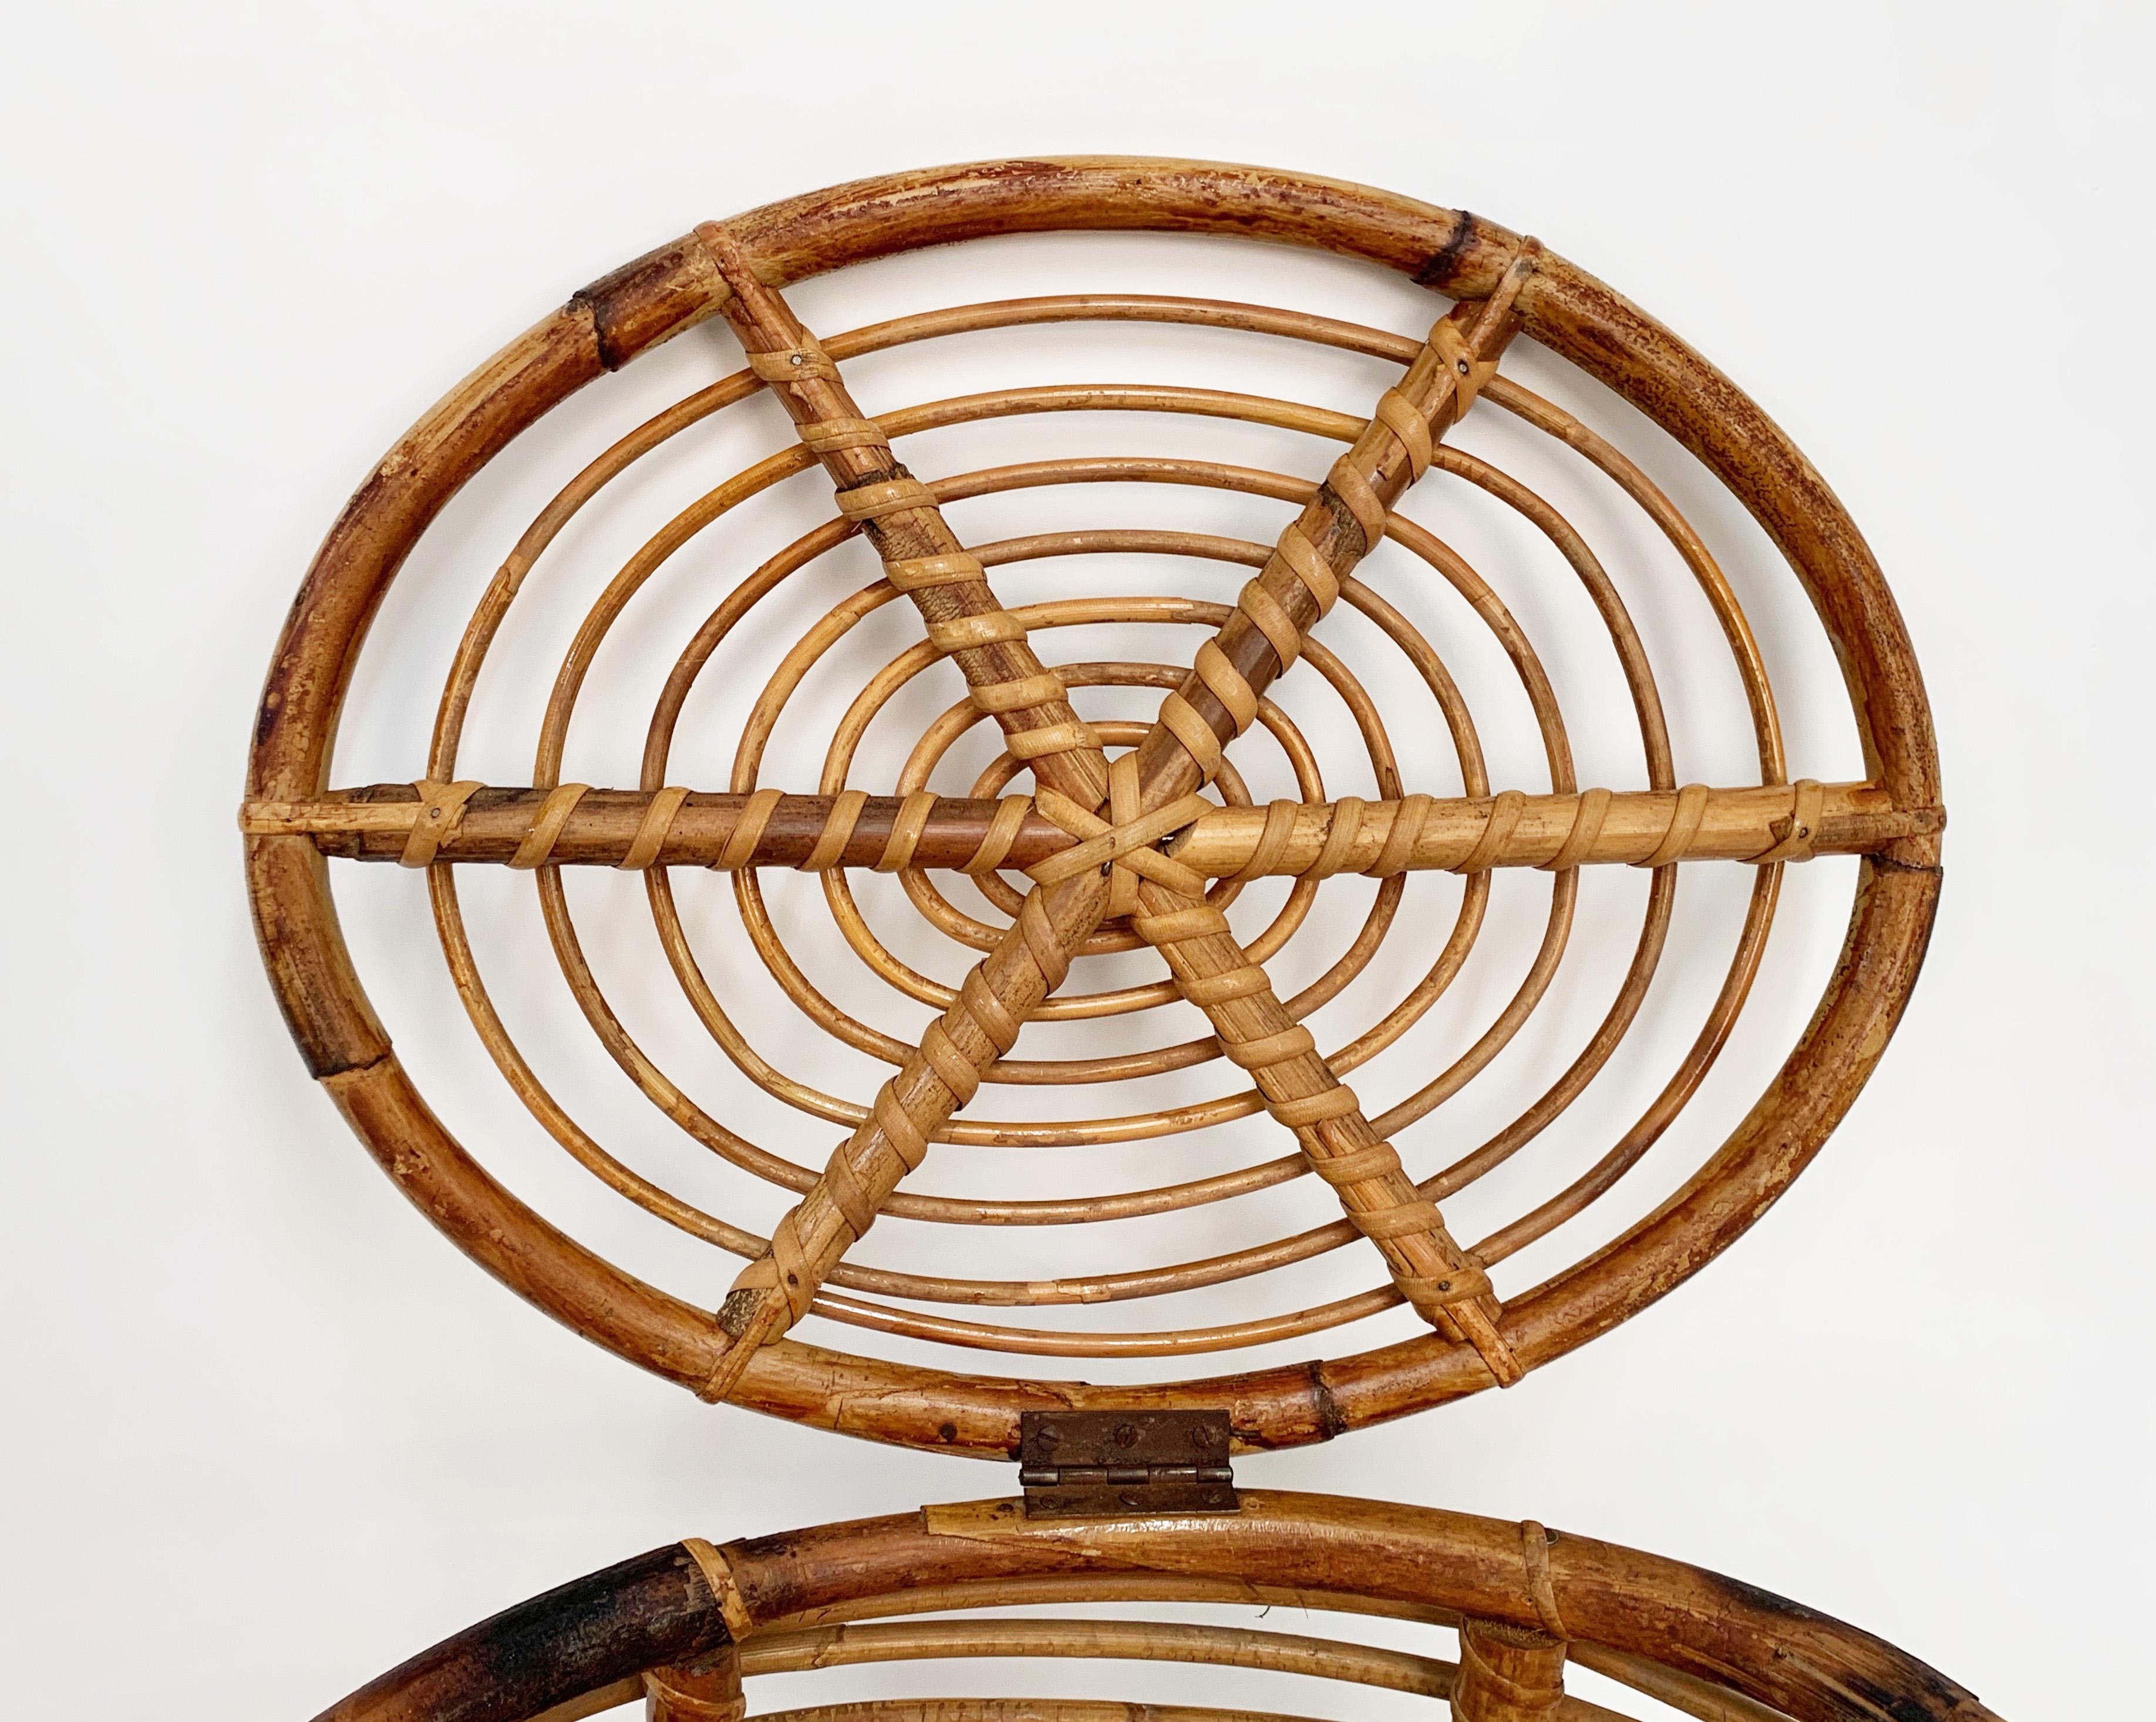 Midcentury French Riviera Bamboo and Rattan Oval Italian Basket, 1950s For Sale 7